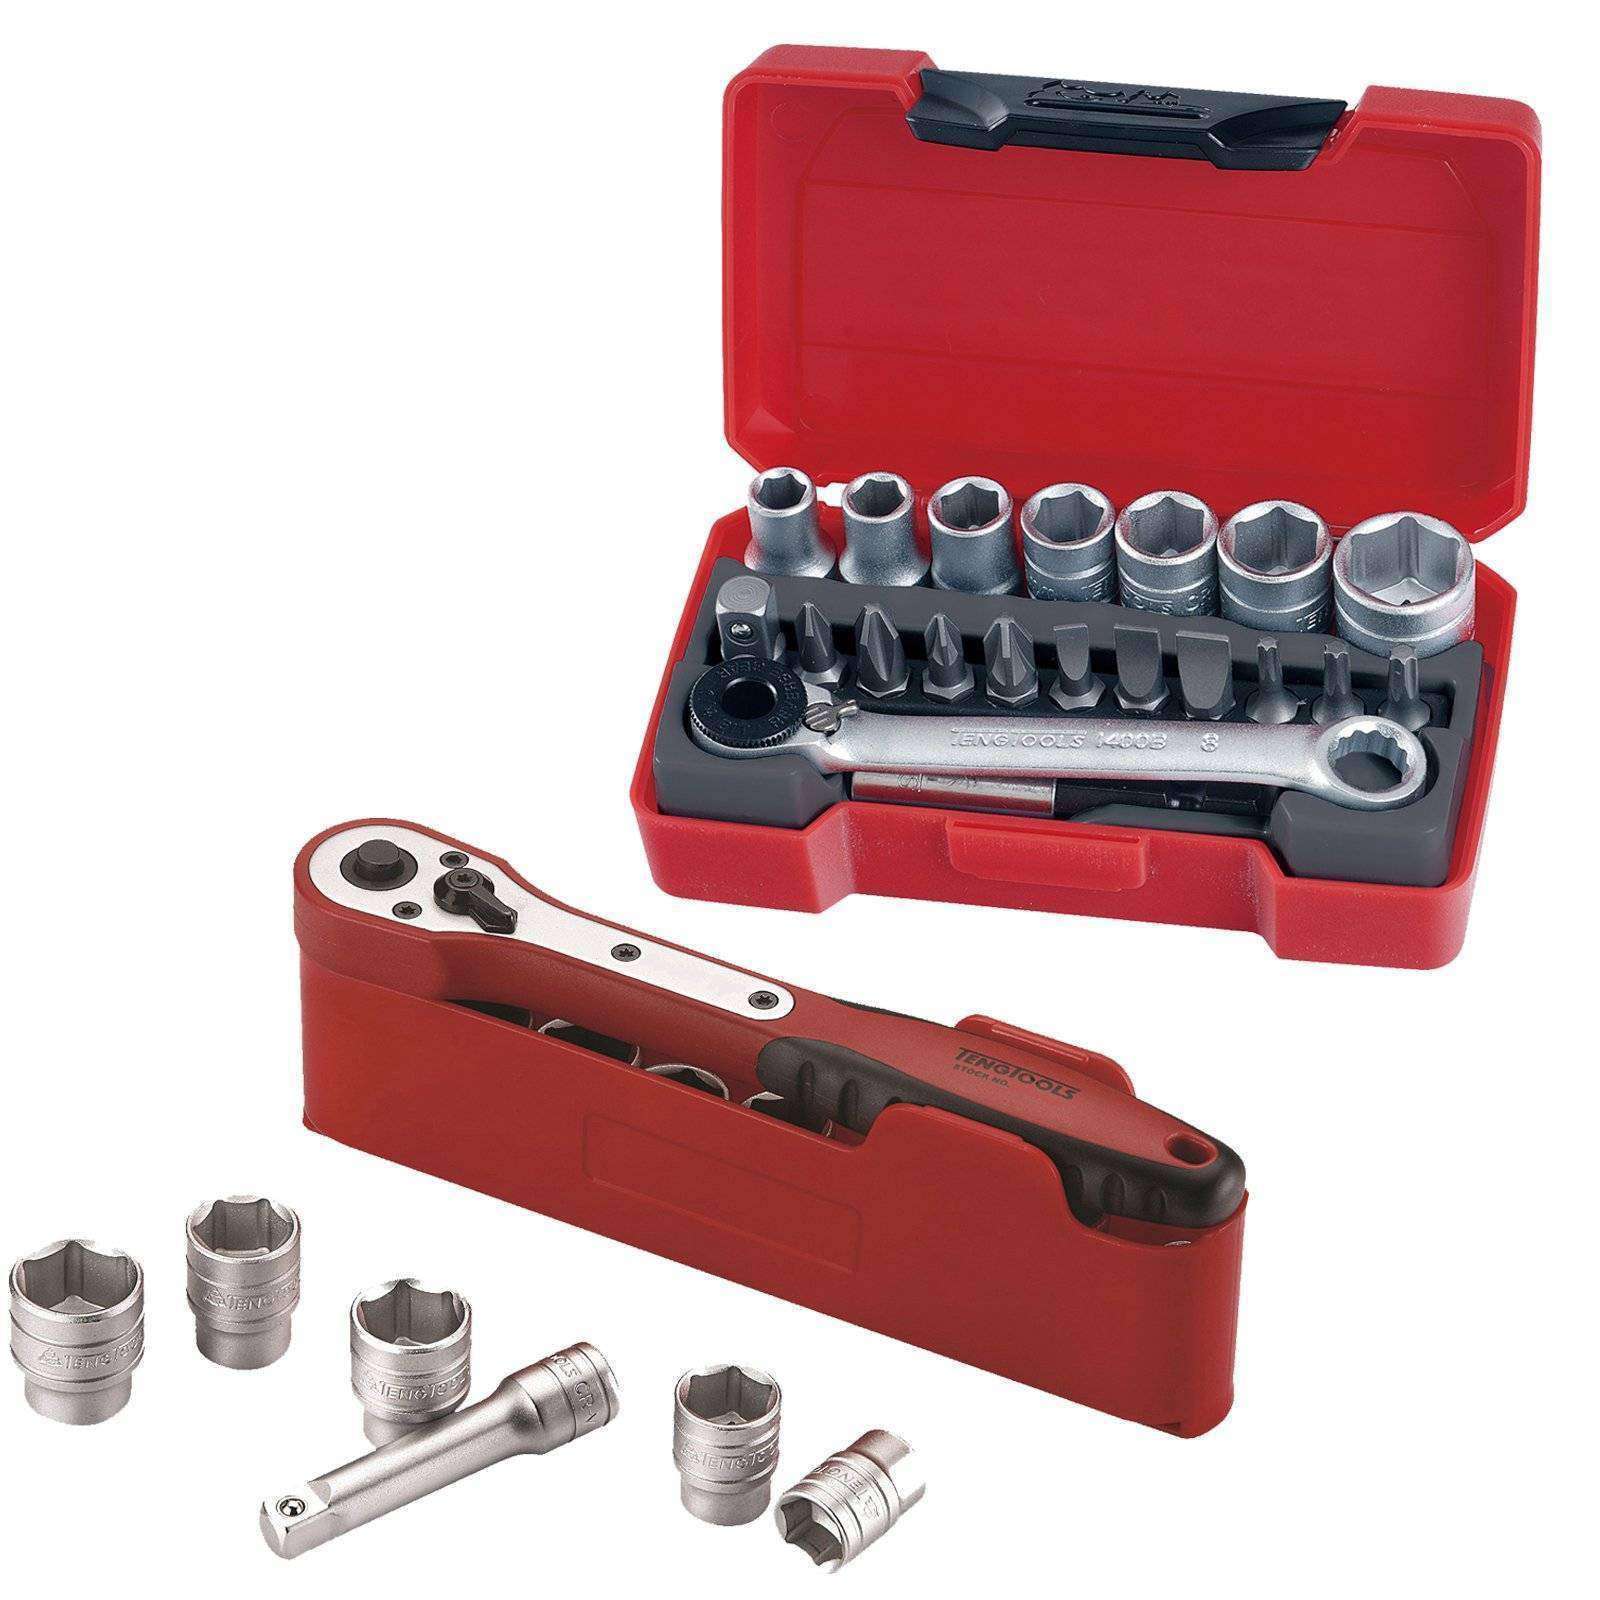 Teng Tools 32 Piece 3/8 Inch and 1/4 Inch Drive Socket Set - M3812N1